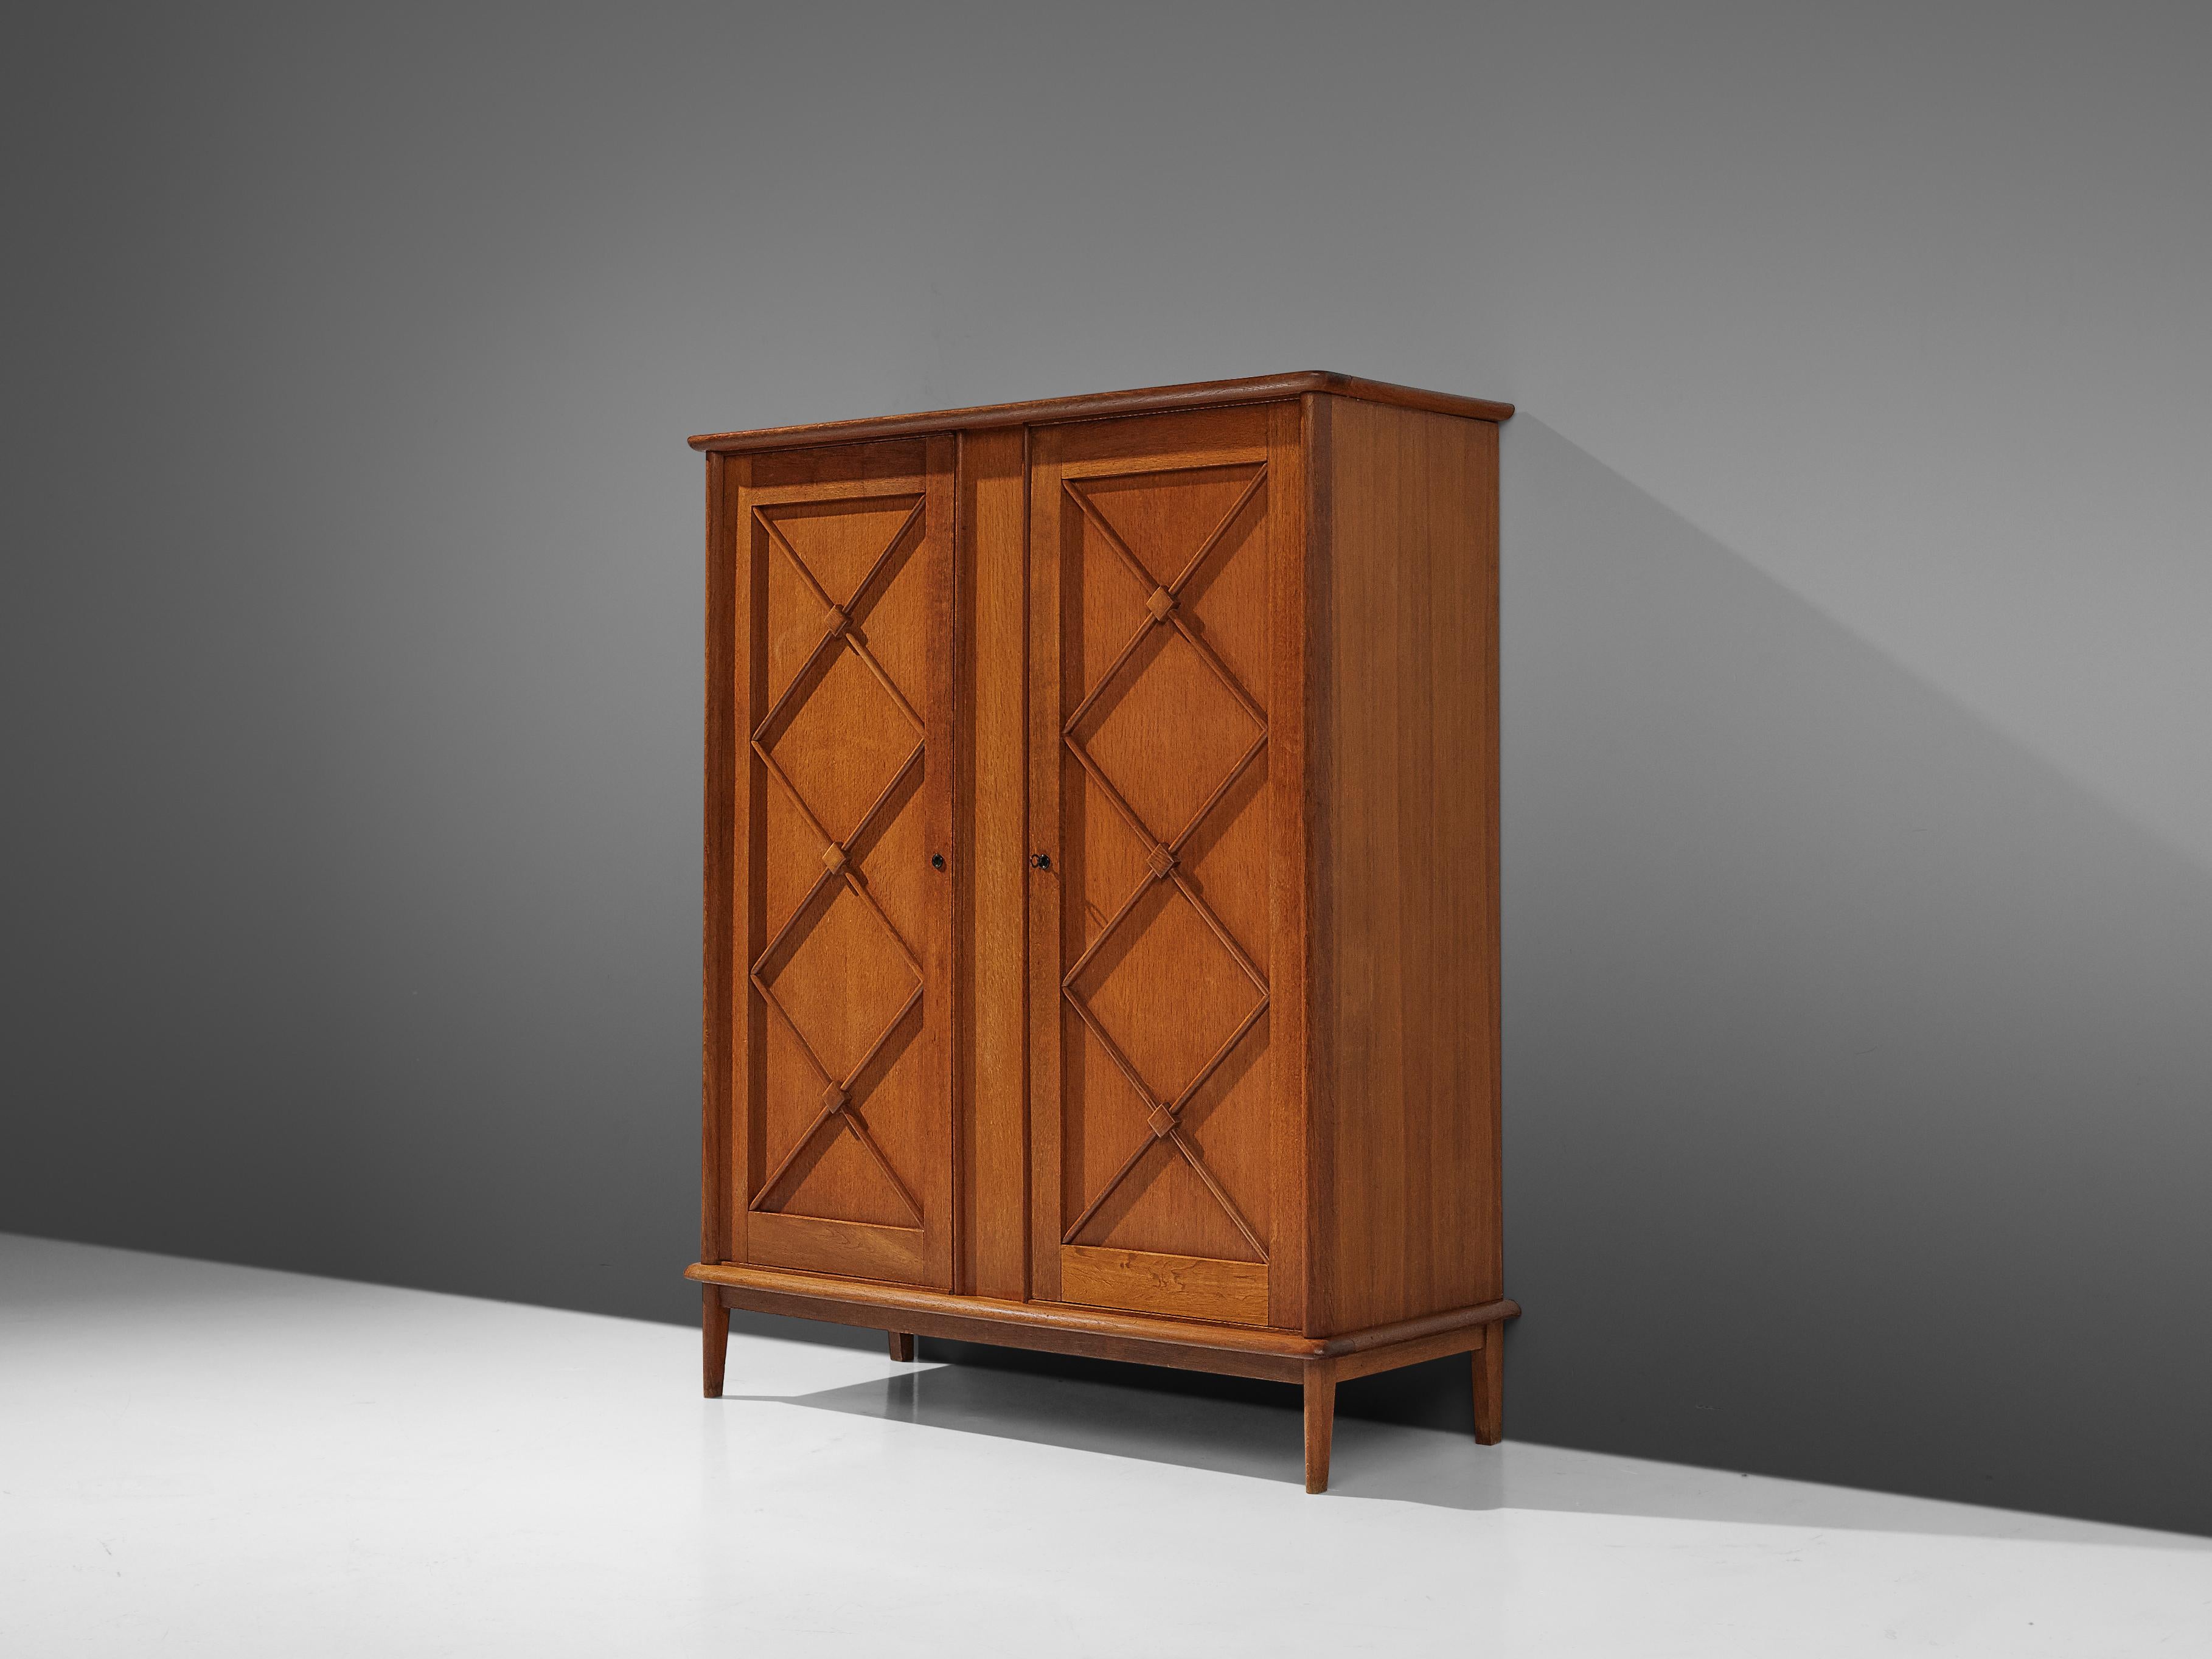 Wardrobe, oak, France, 1960s

An elegant wardrobe in oak that features geometric details in the doors. Round slats with accentuated midpoints decorate the two doors. The inside is structured in two compartments. On the left a clothes rail is